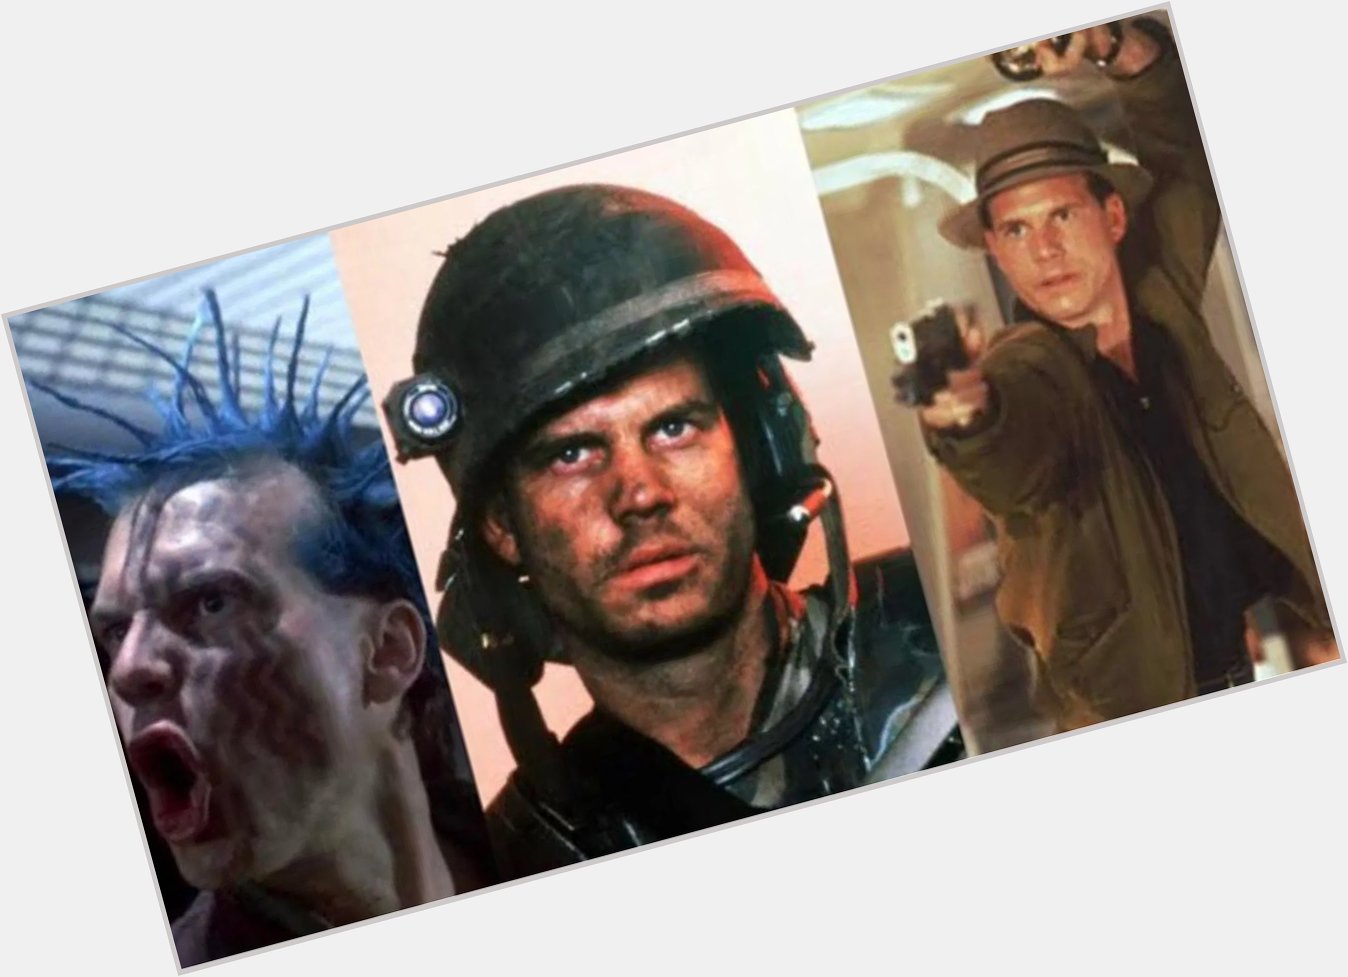 Happy birthday to Bill Paxton who stared in some of the greatest films ever! 